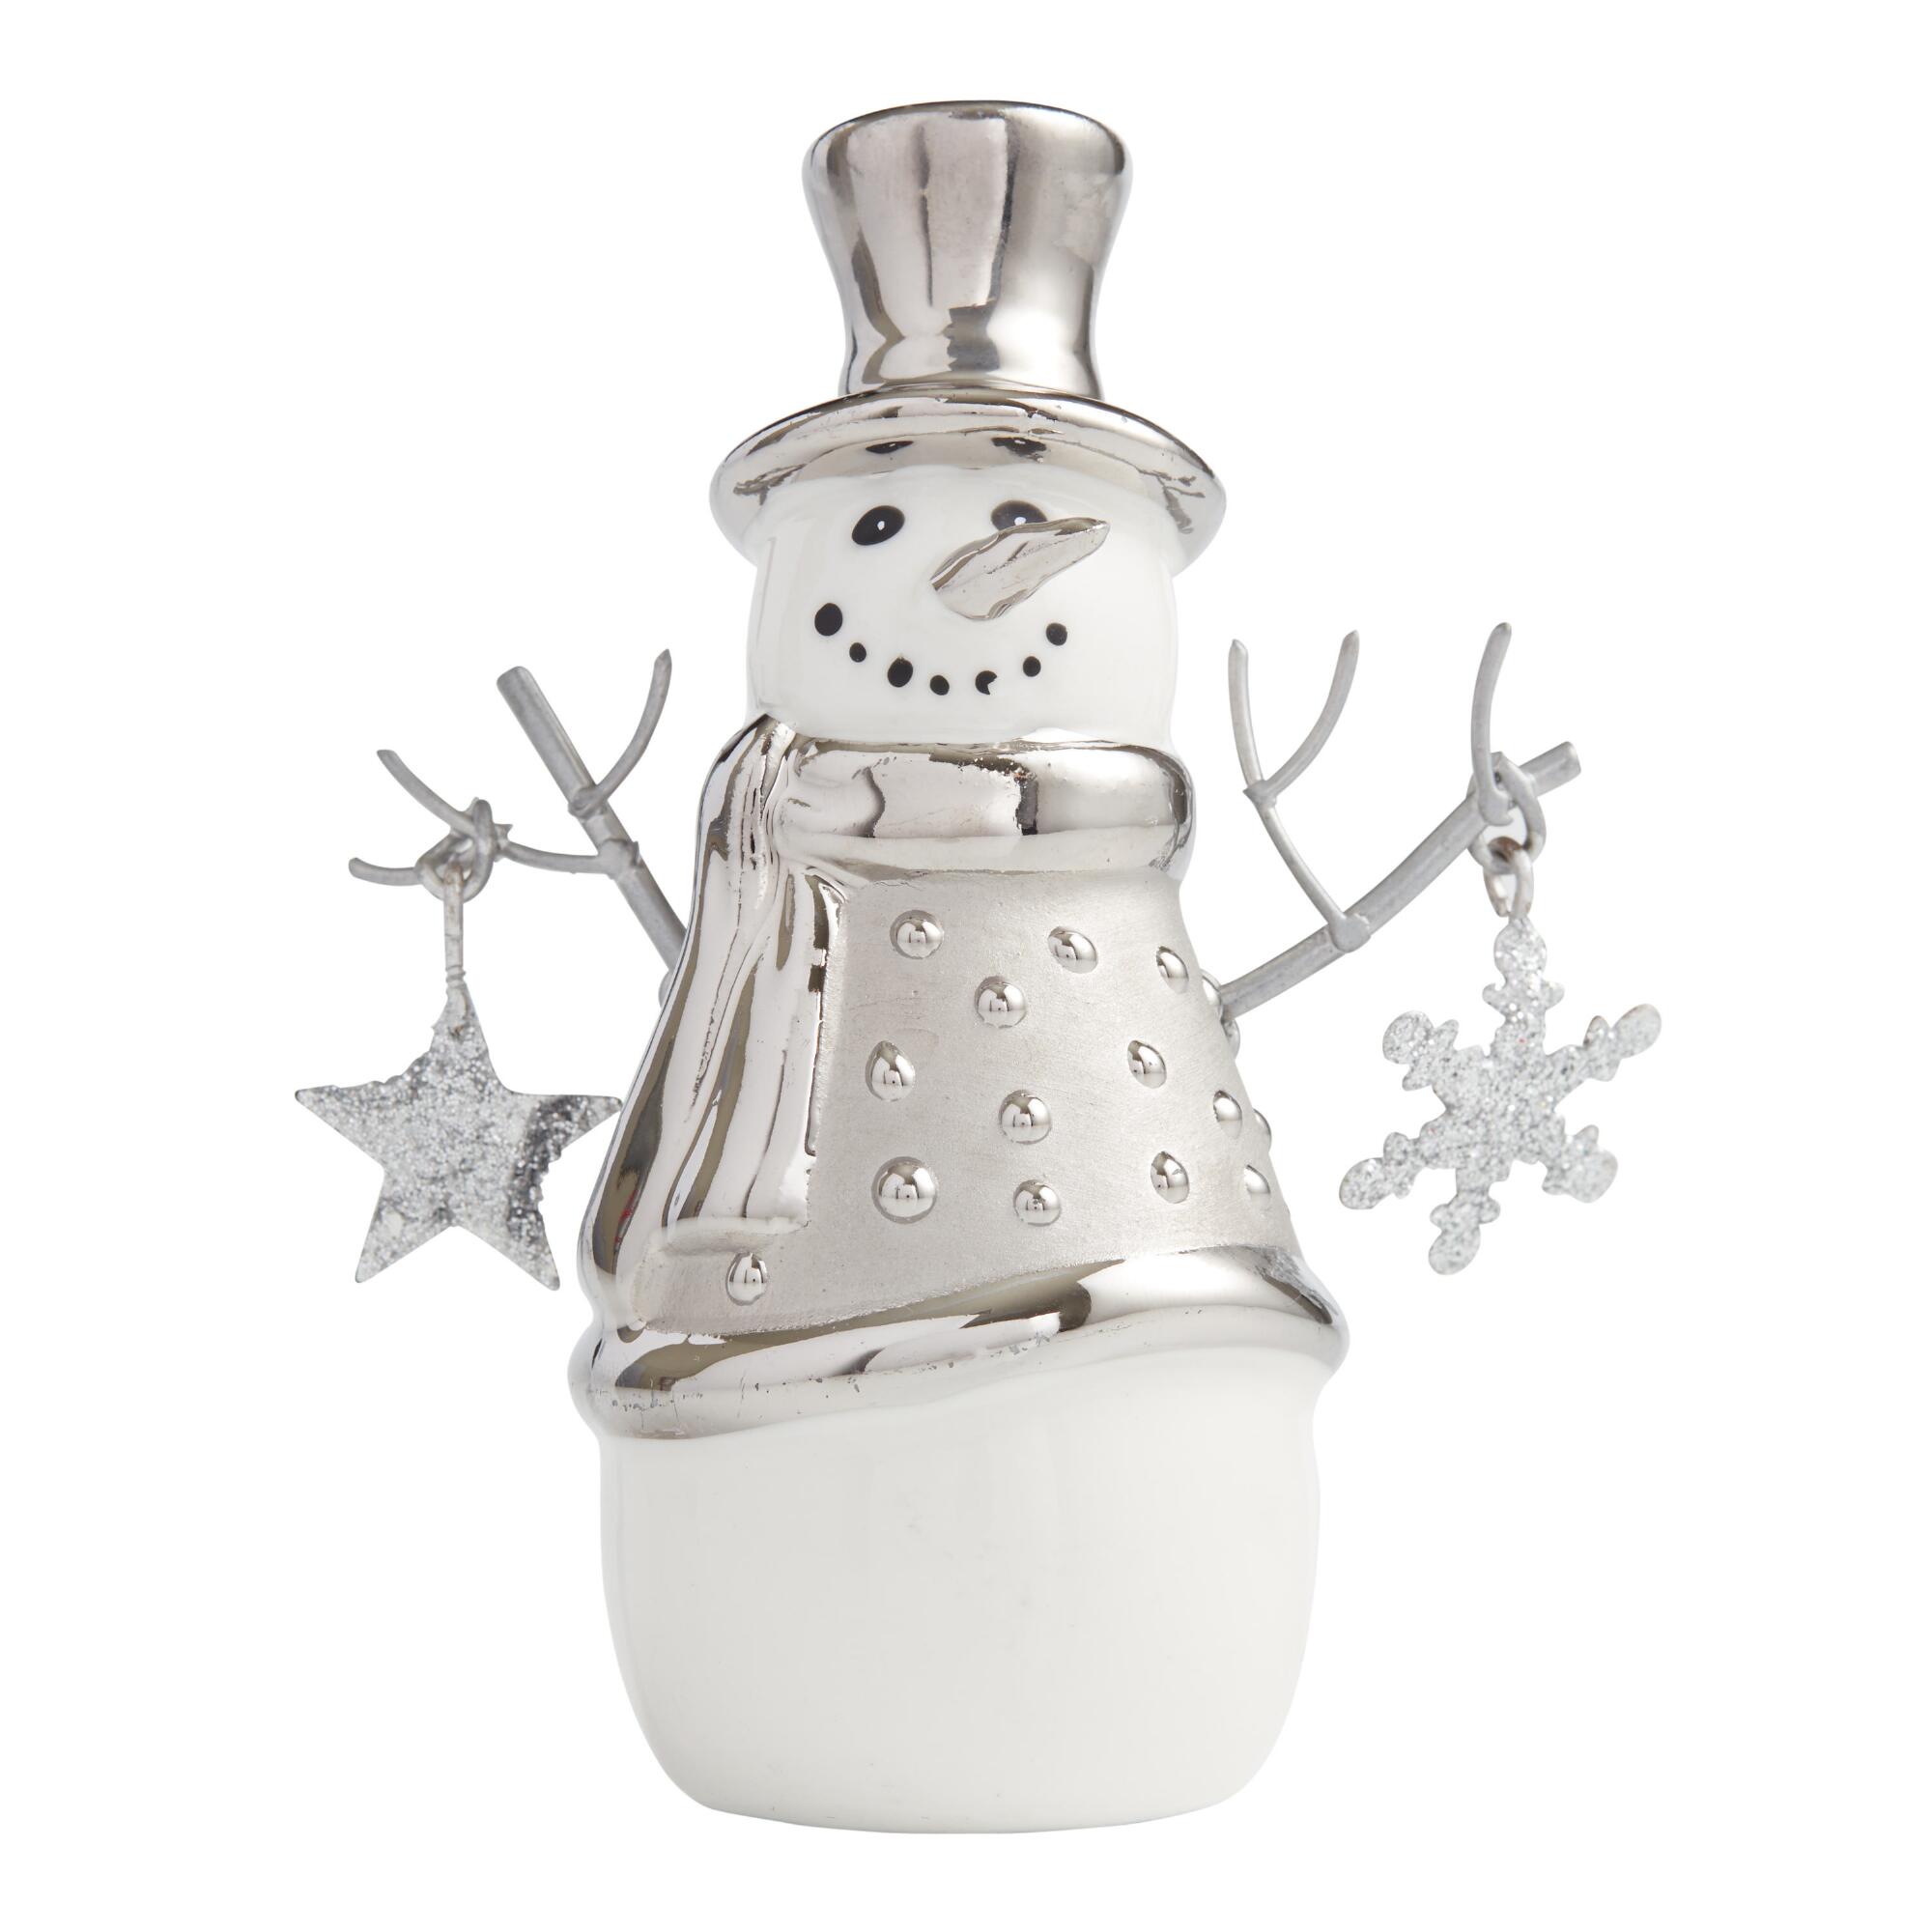 Pier Place White And Silver Ceramic Snowman Figurine: White/Silver by World Market